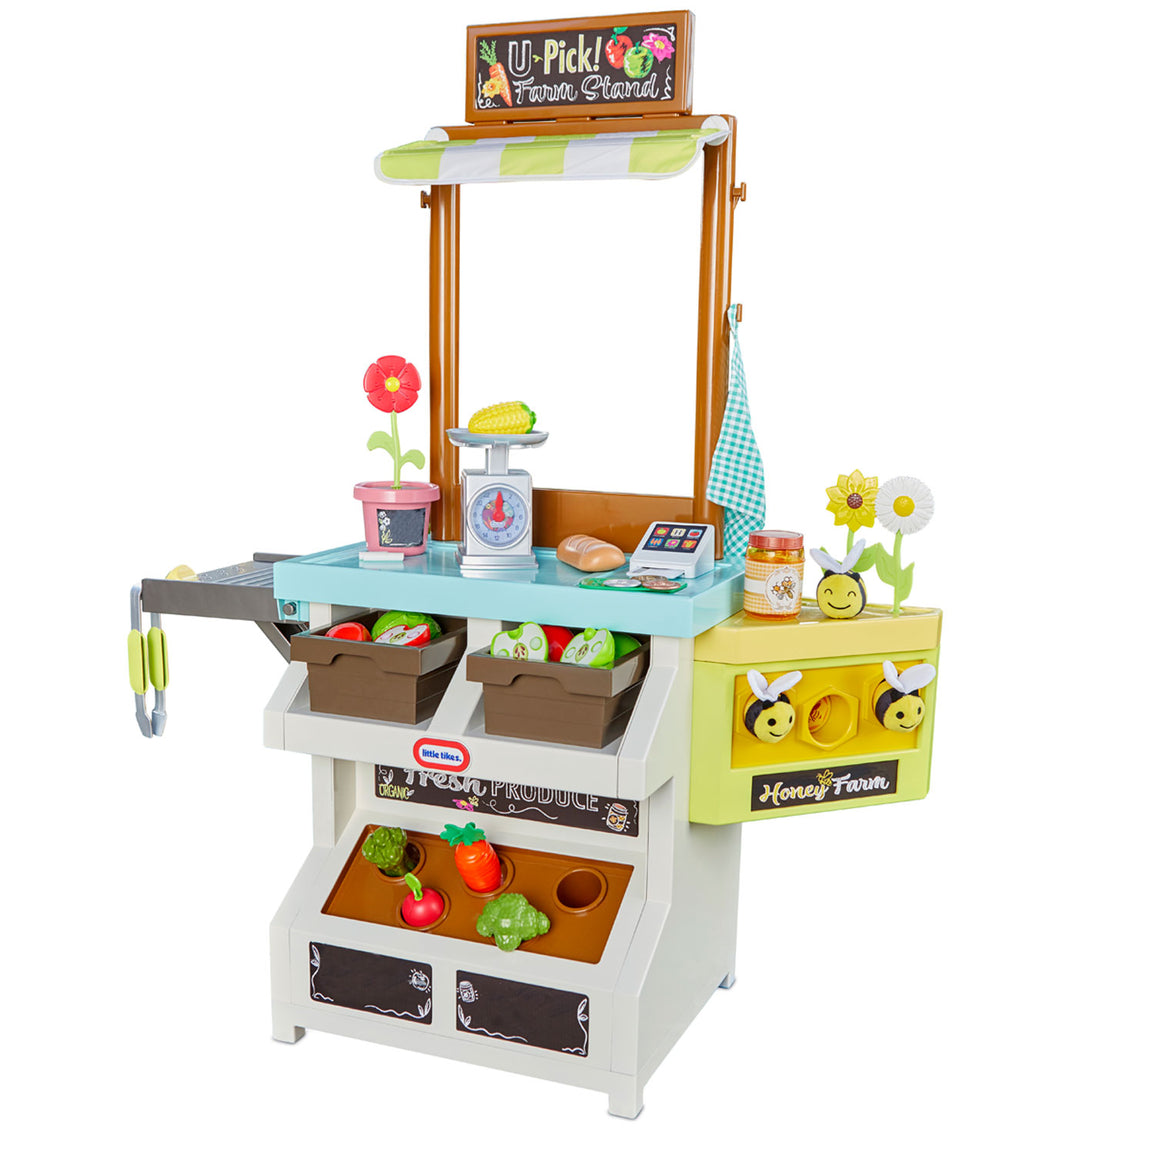 3-in-1 Garden to Table Market - Official Little Tikes Website